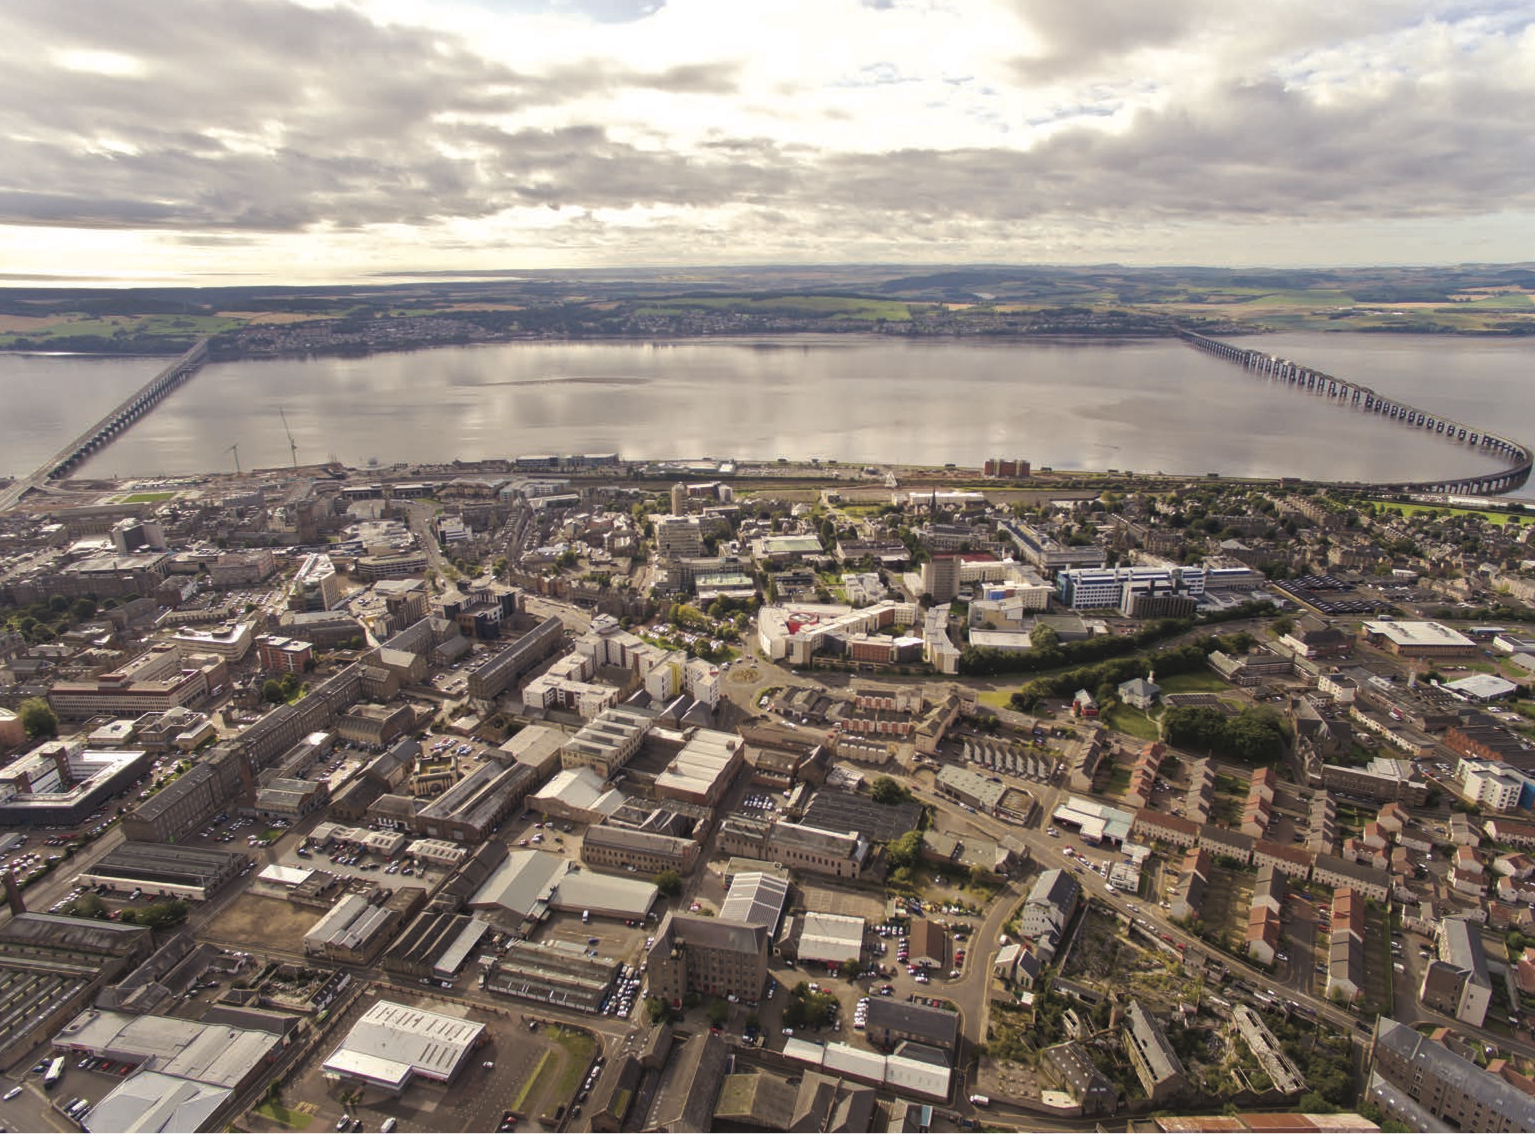 Looking north over Dundee showing the waterfront development and site for V&A Dundee.